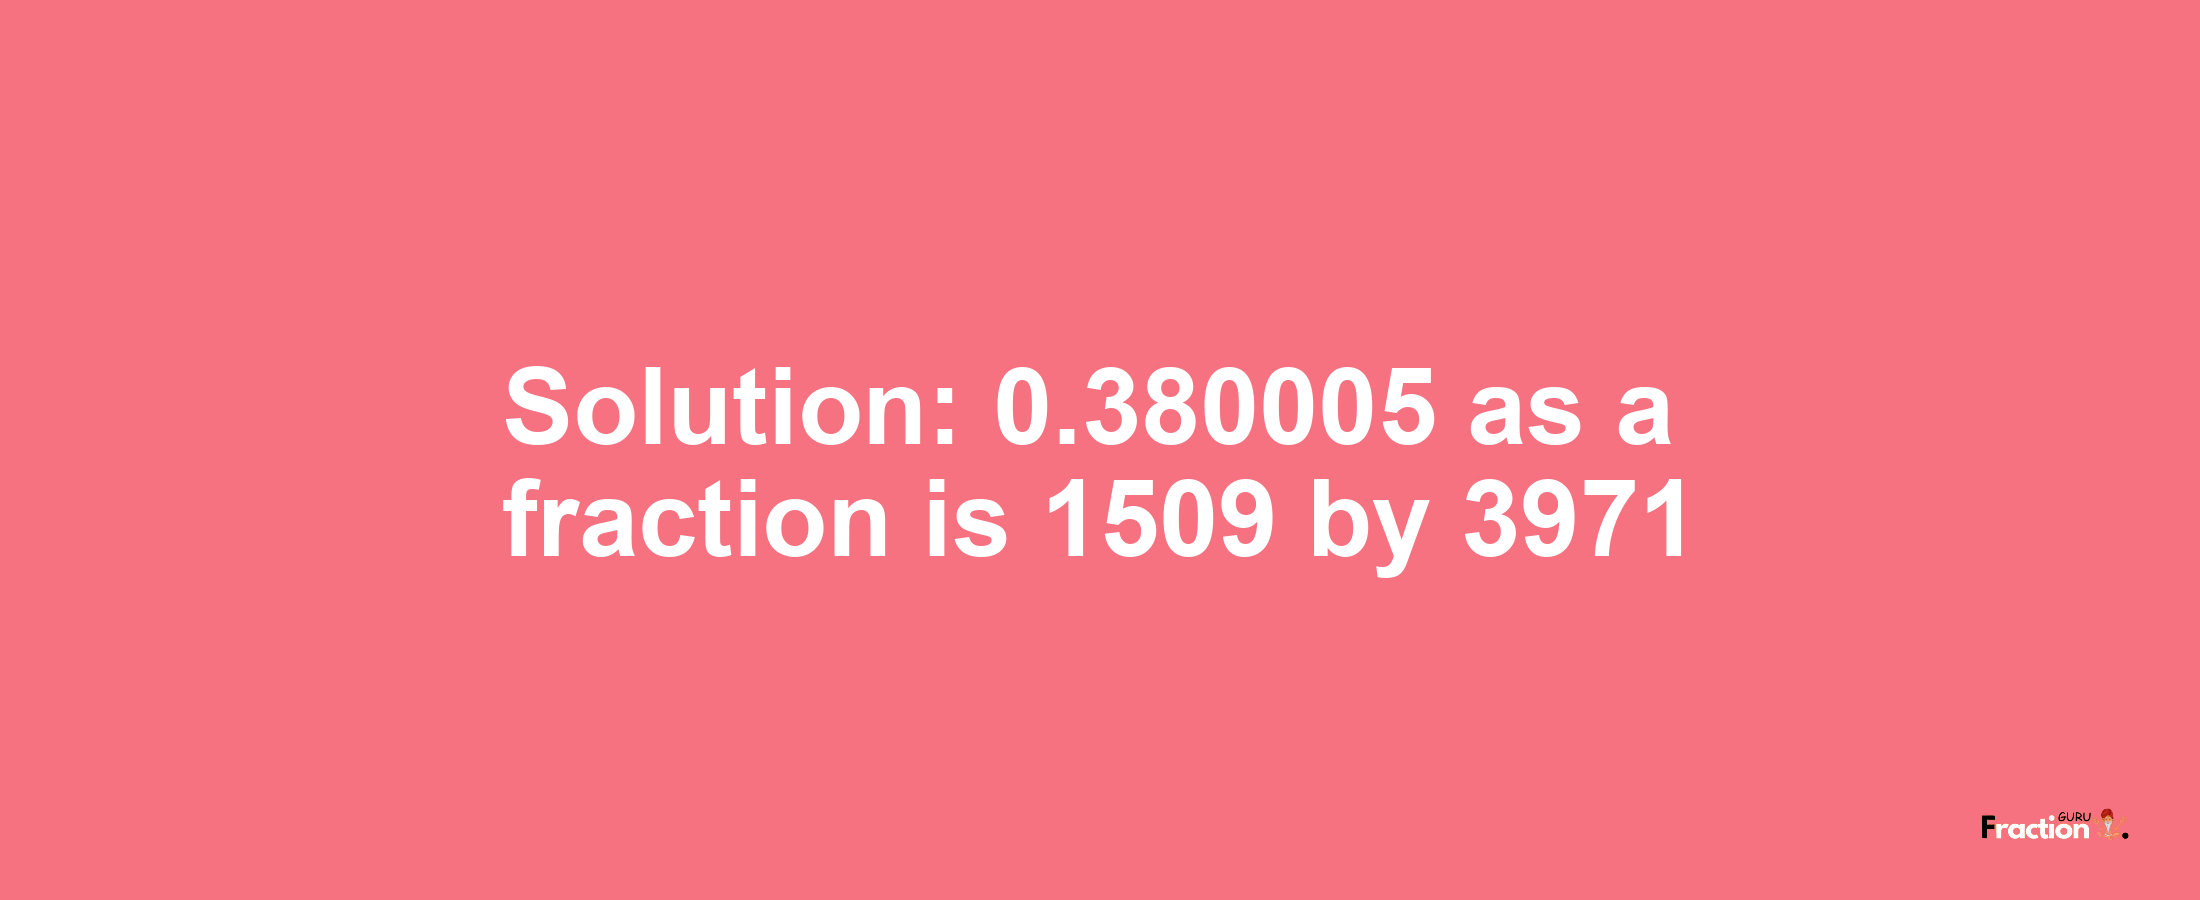 Solution:0.380005 as a fraction is 1509/3971